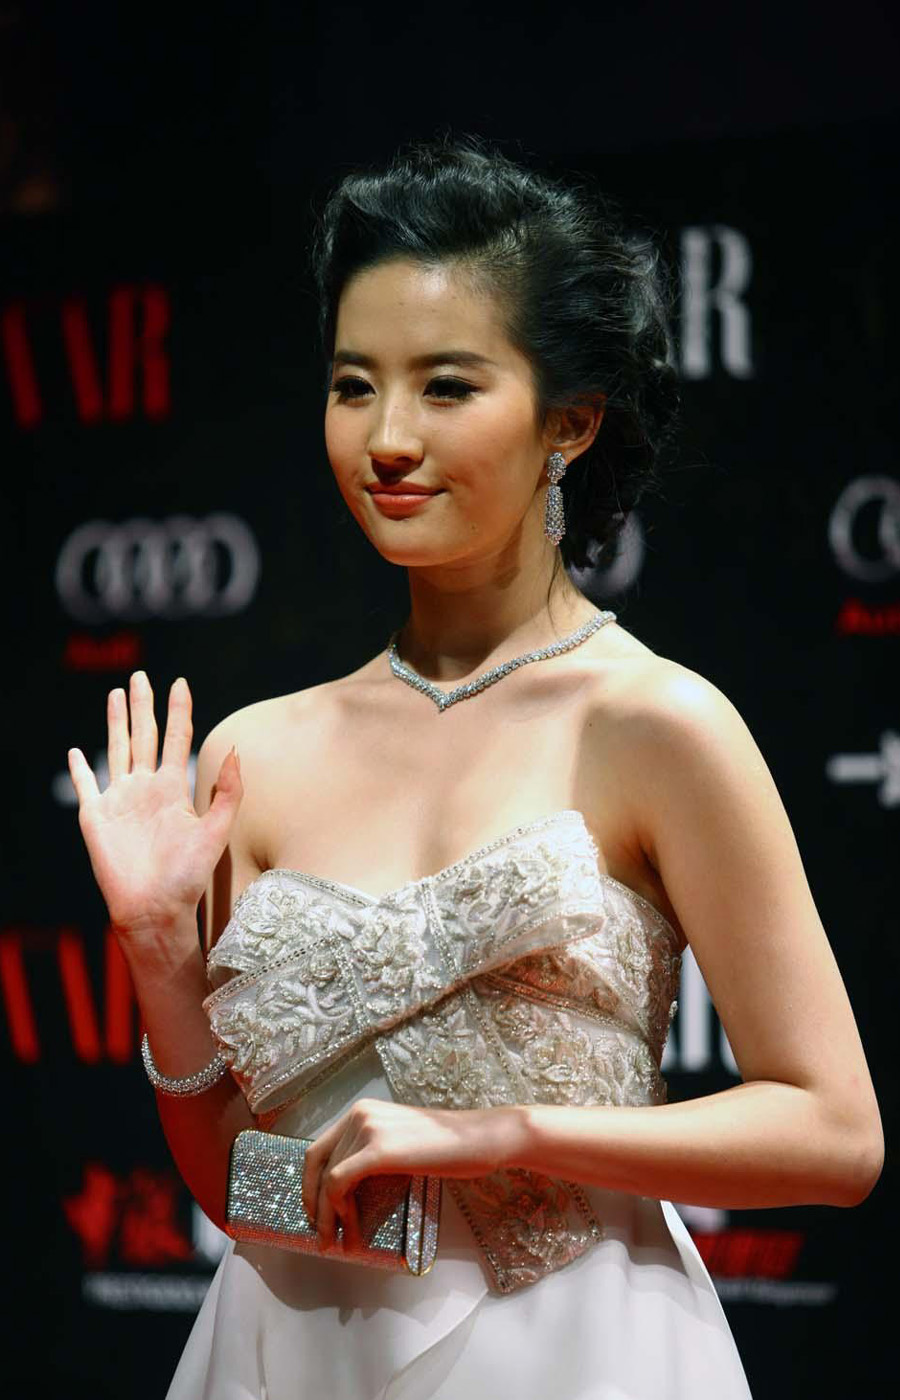 Liu Yifei Chinese actress HD wallpapers 1080p free download at HDwalle.com,...